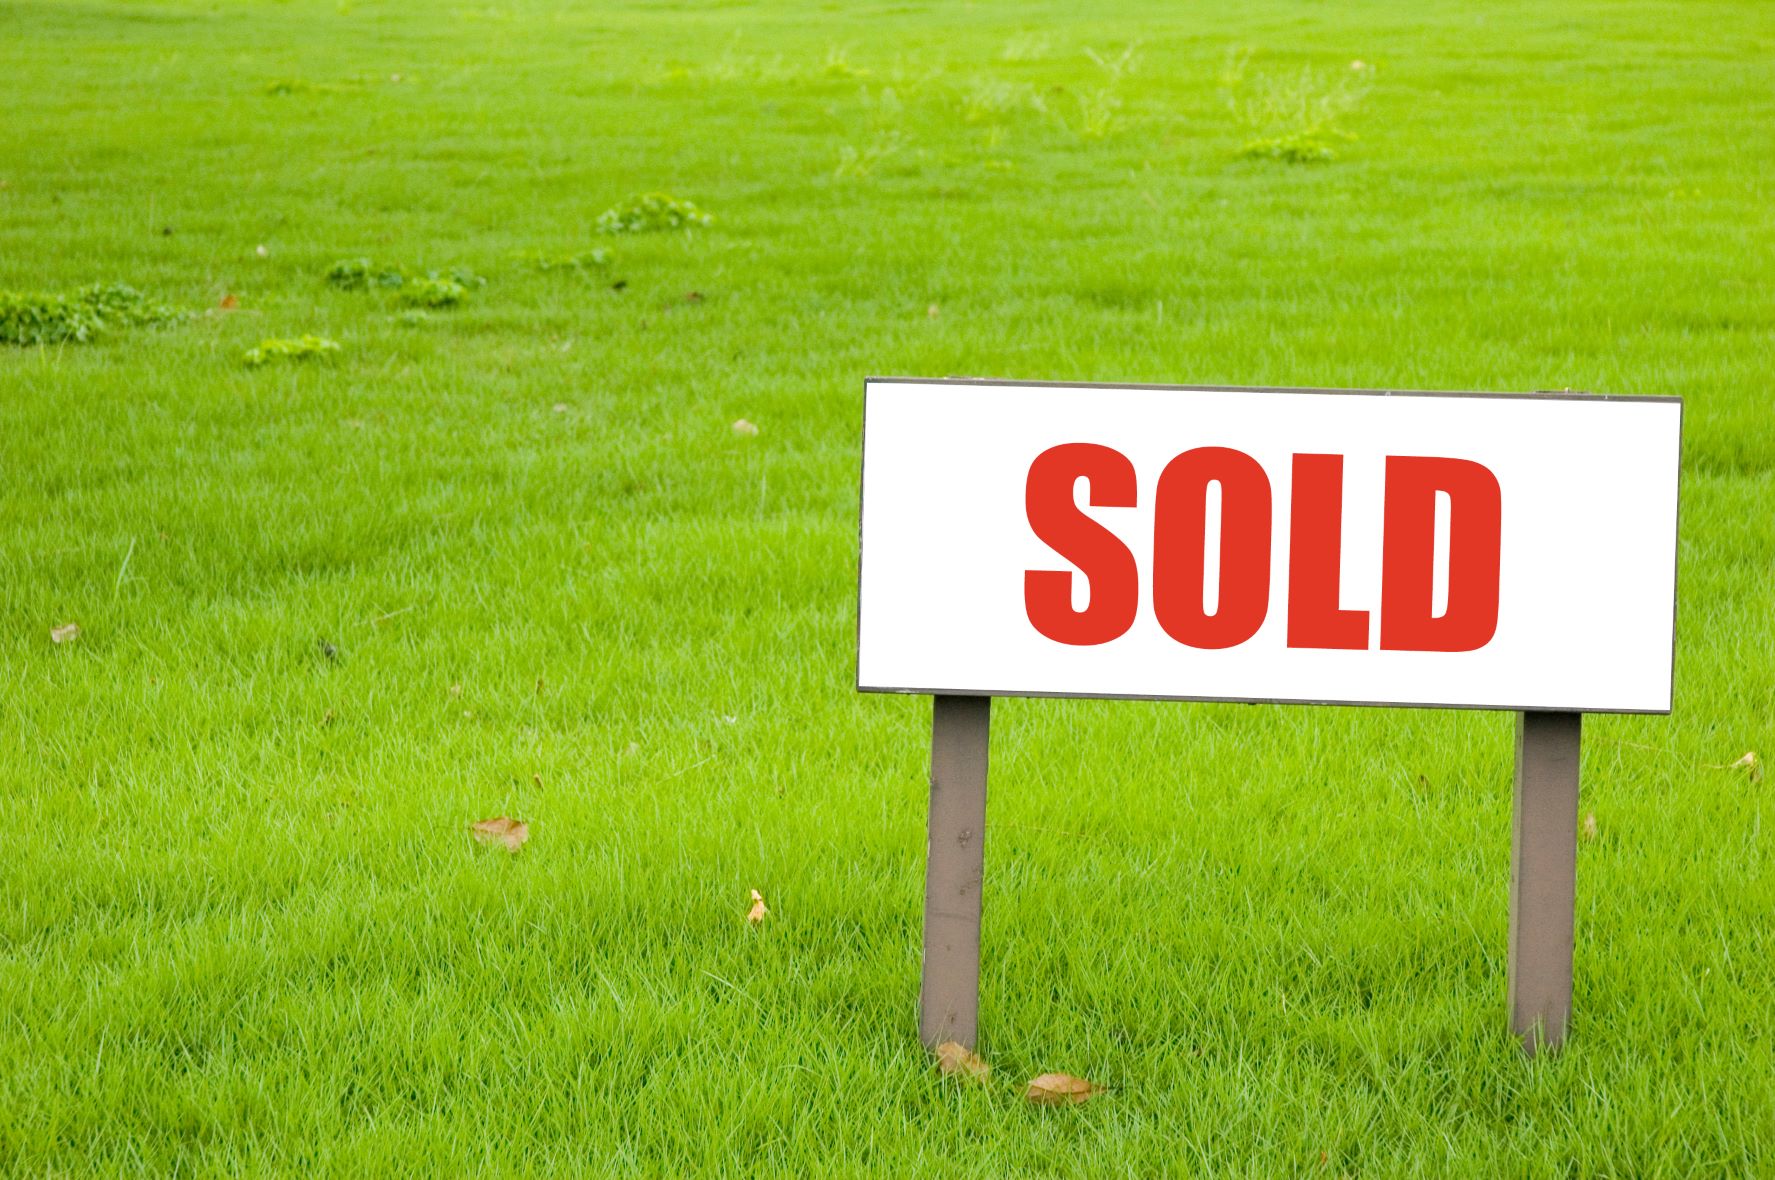 Photo of a grassy field with a "Sold" sign on it.